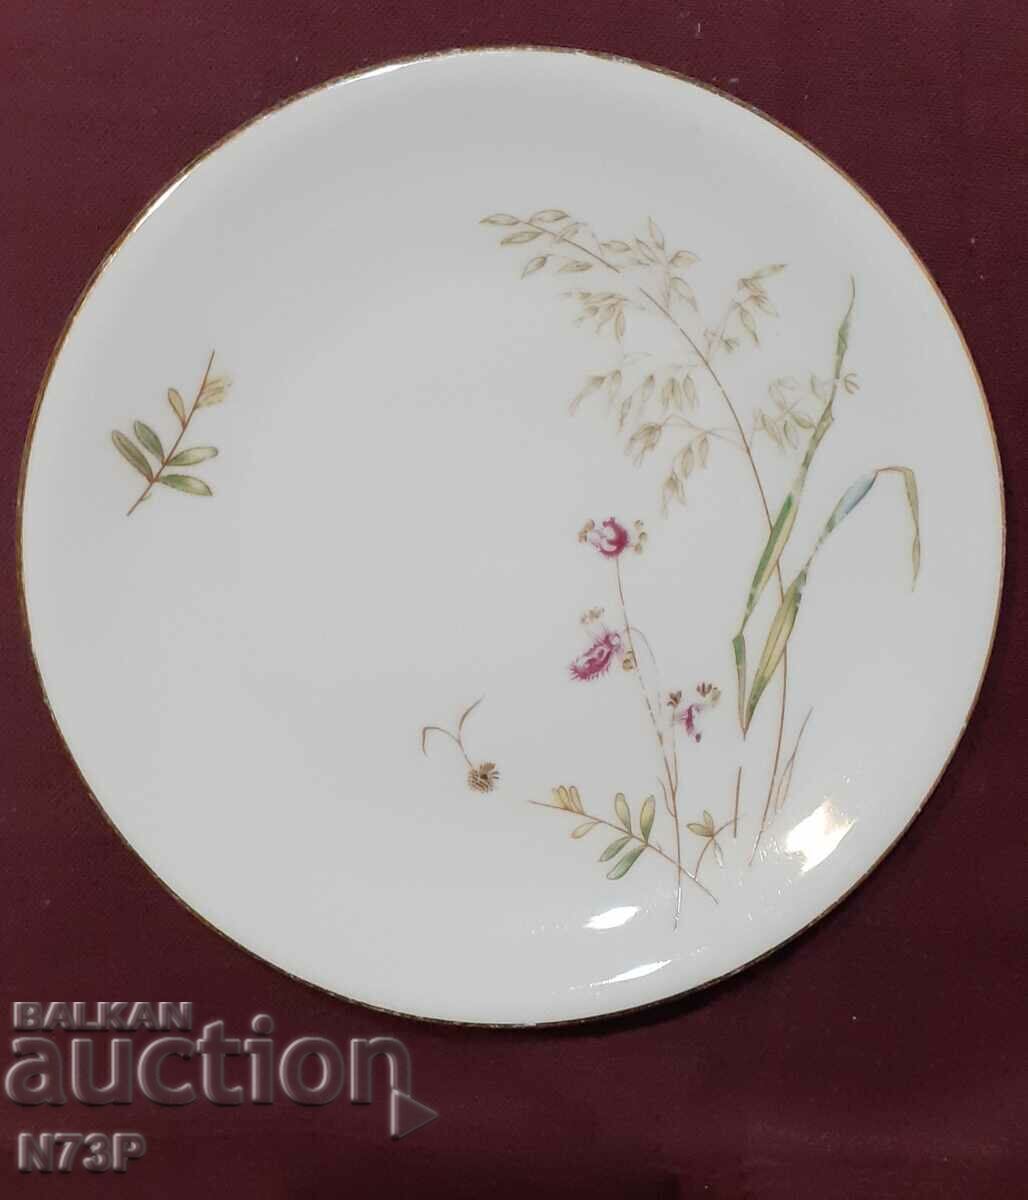 OLD PORCELAIN PLATE. COLLECTION. MADE IN GERMANY.